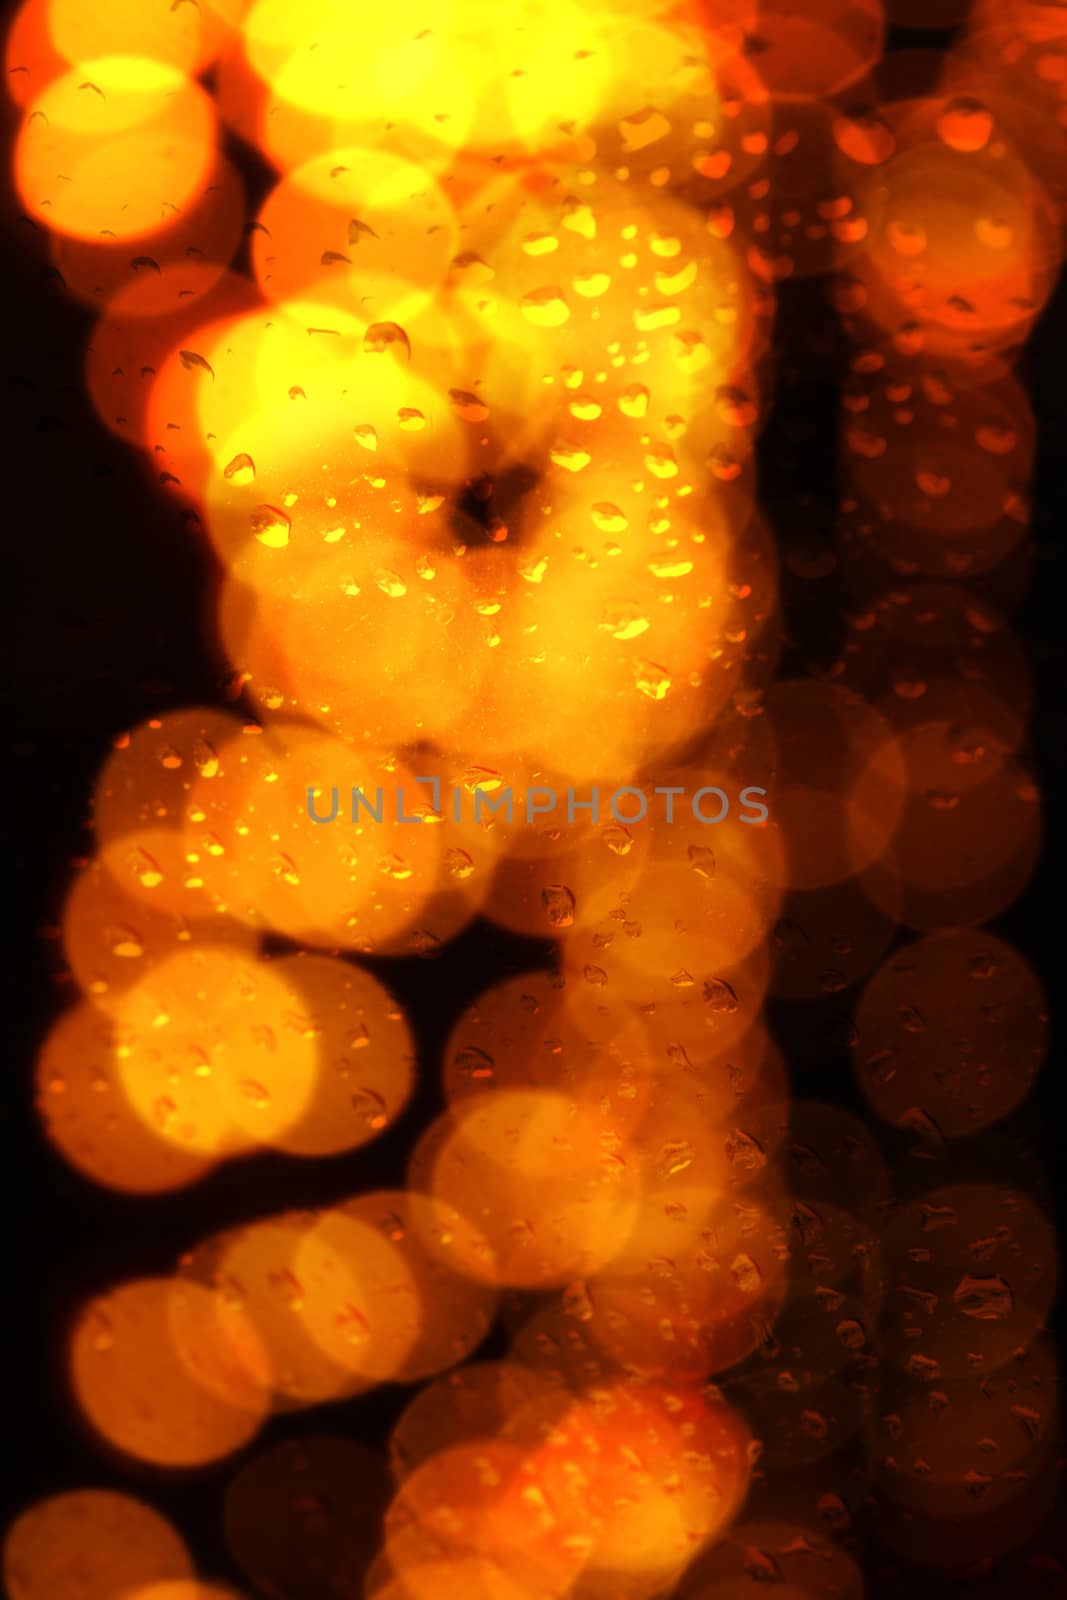 An abstract background of a glass pane with droplets with a droplet of festive lights